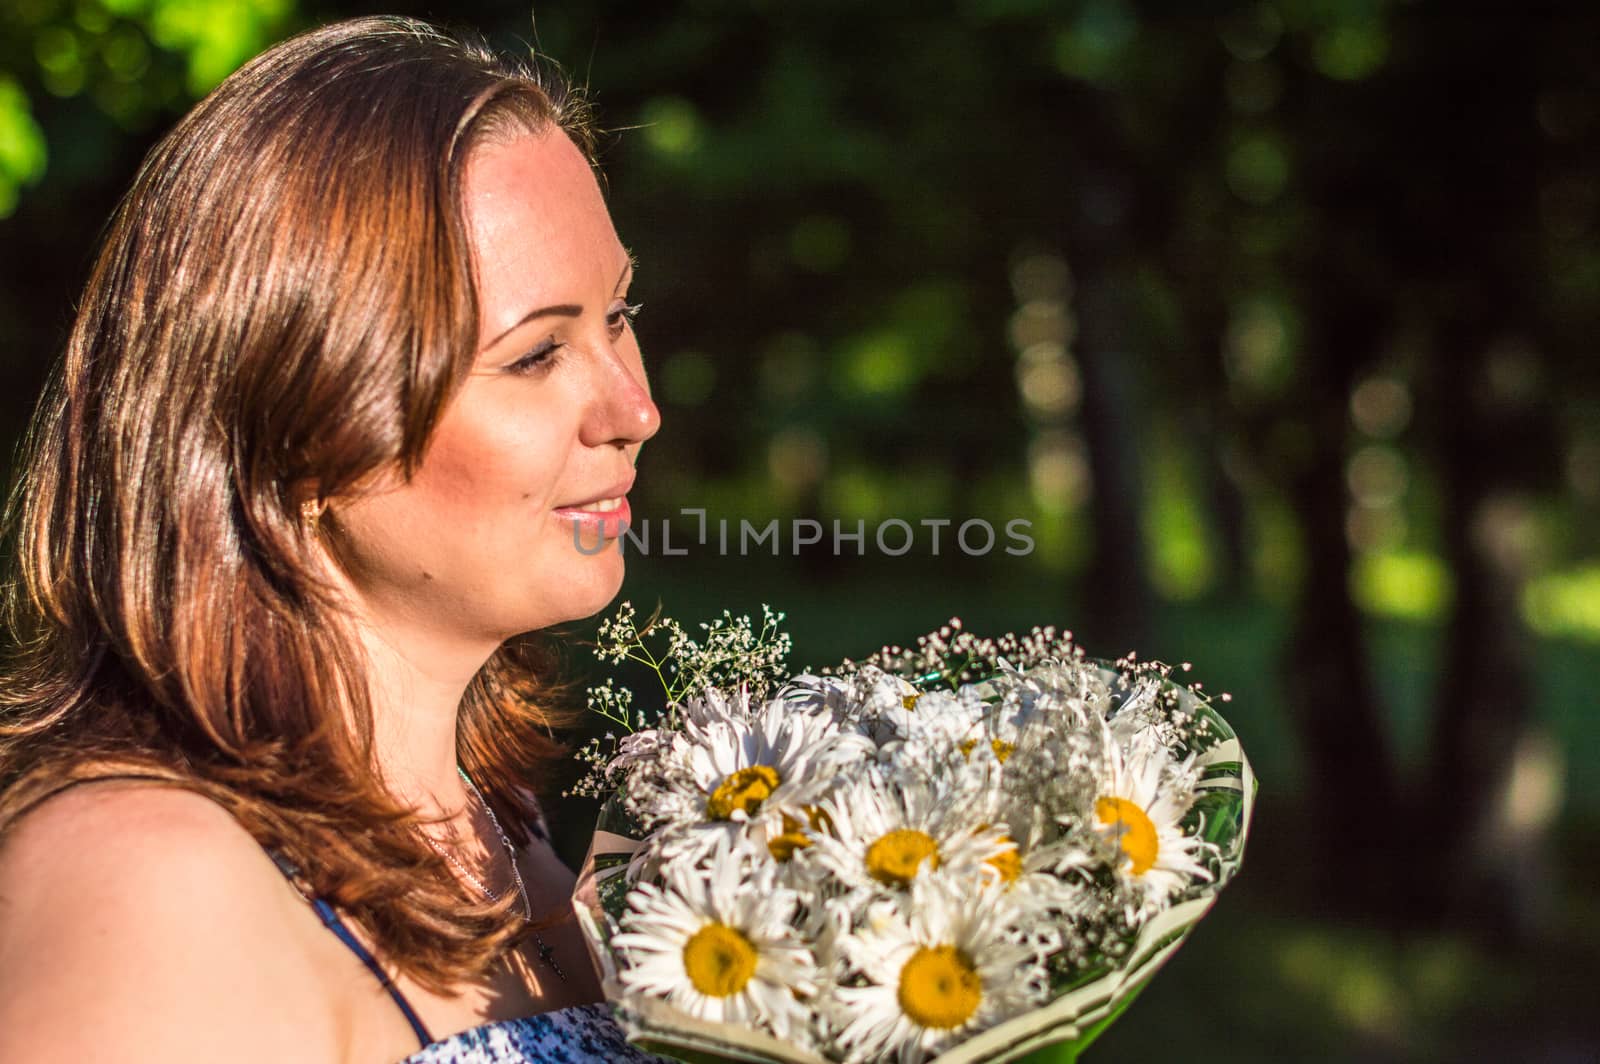 woman with bouquet of daisies by okskukuruza